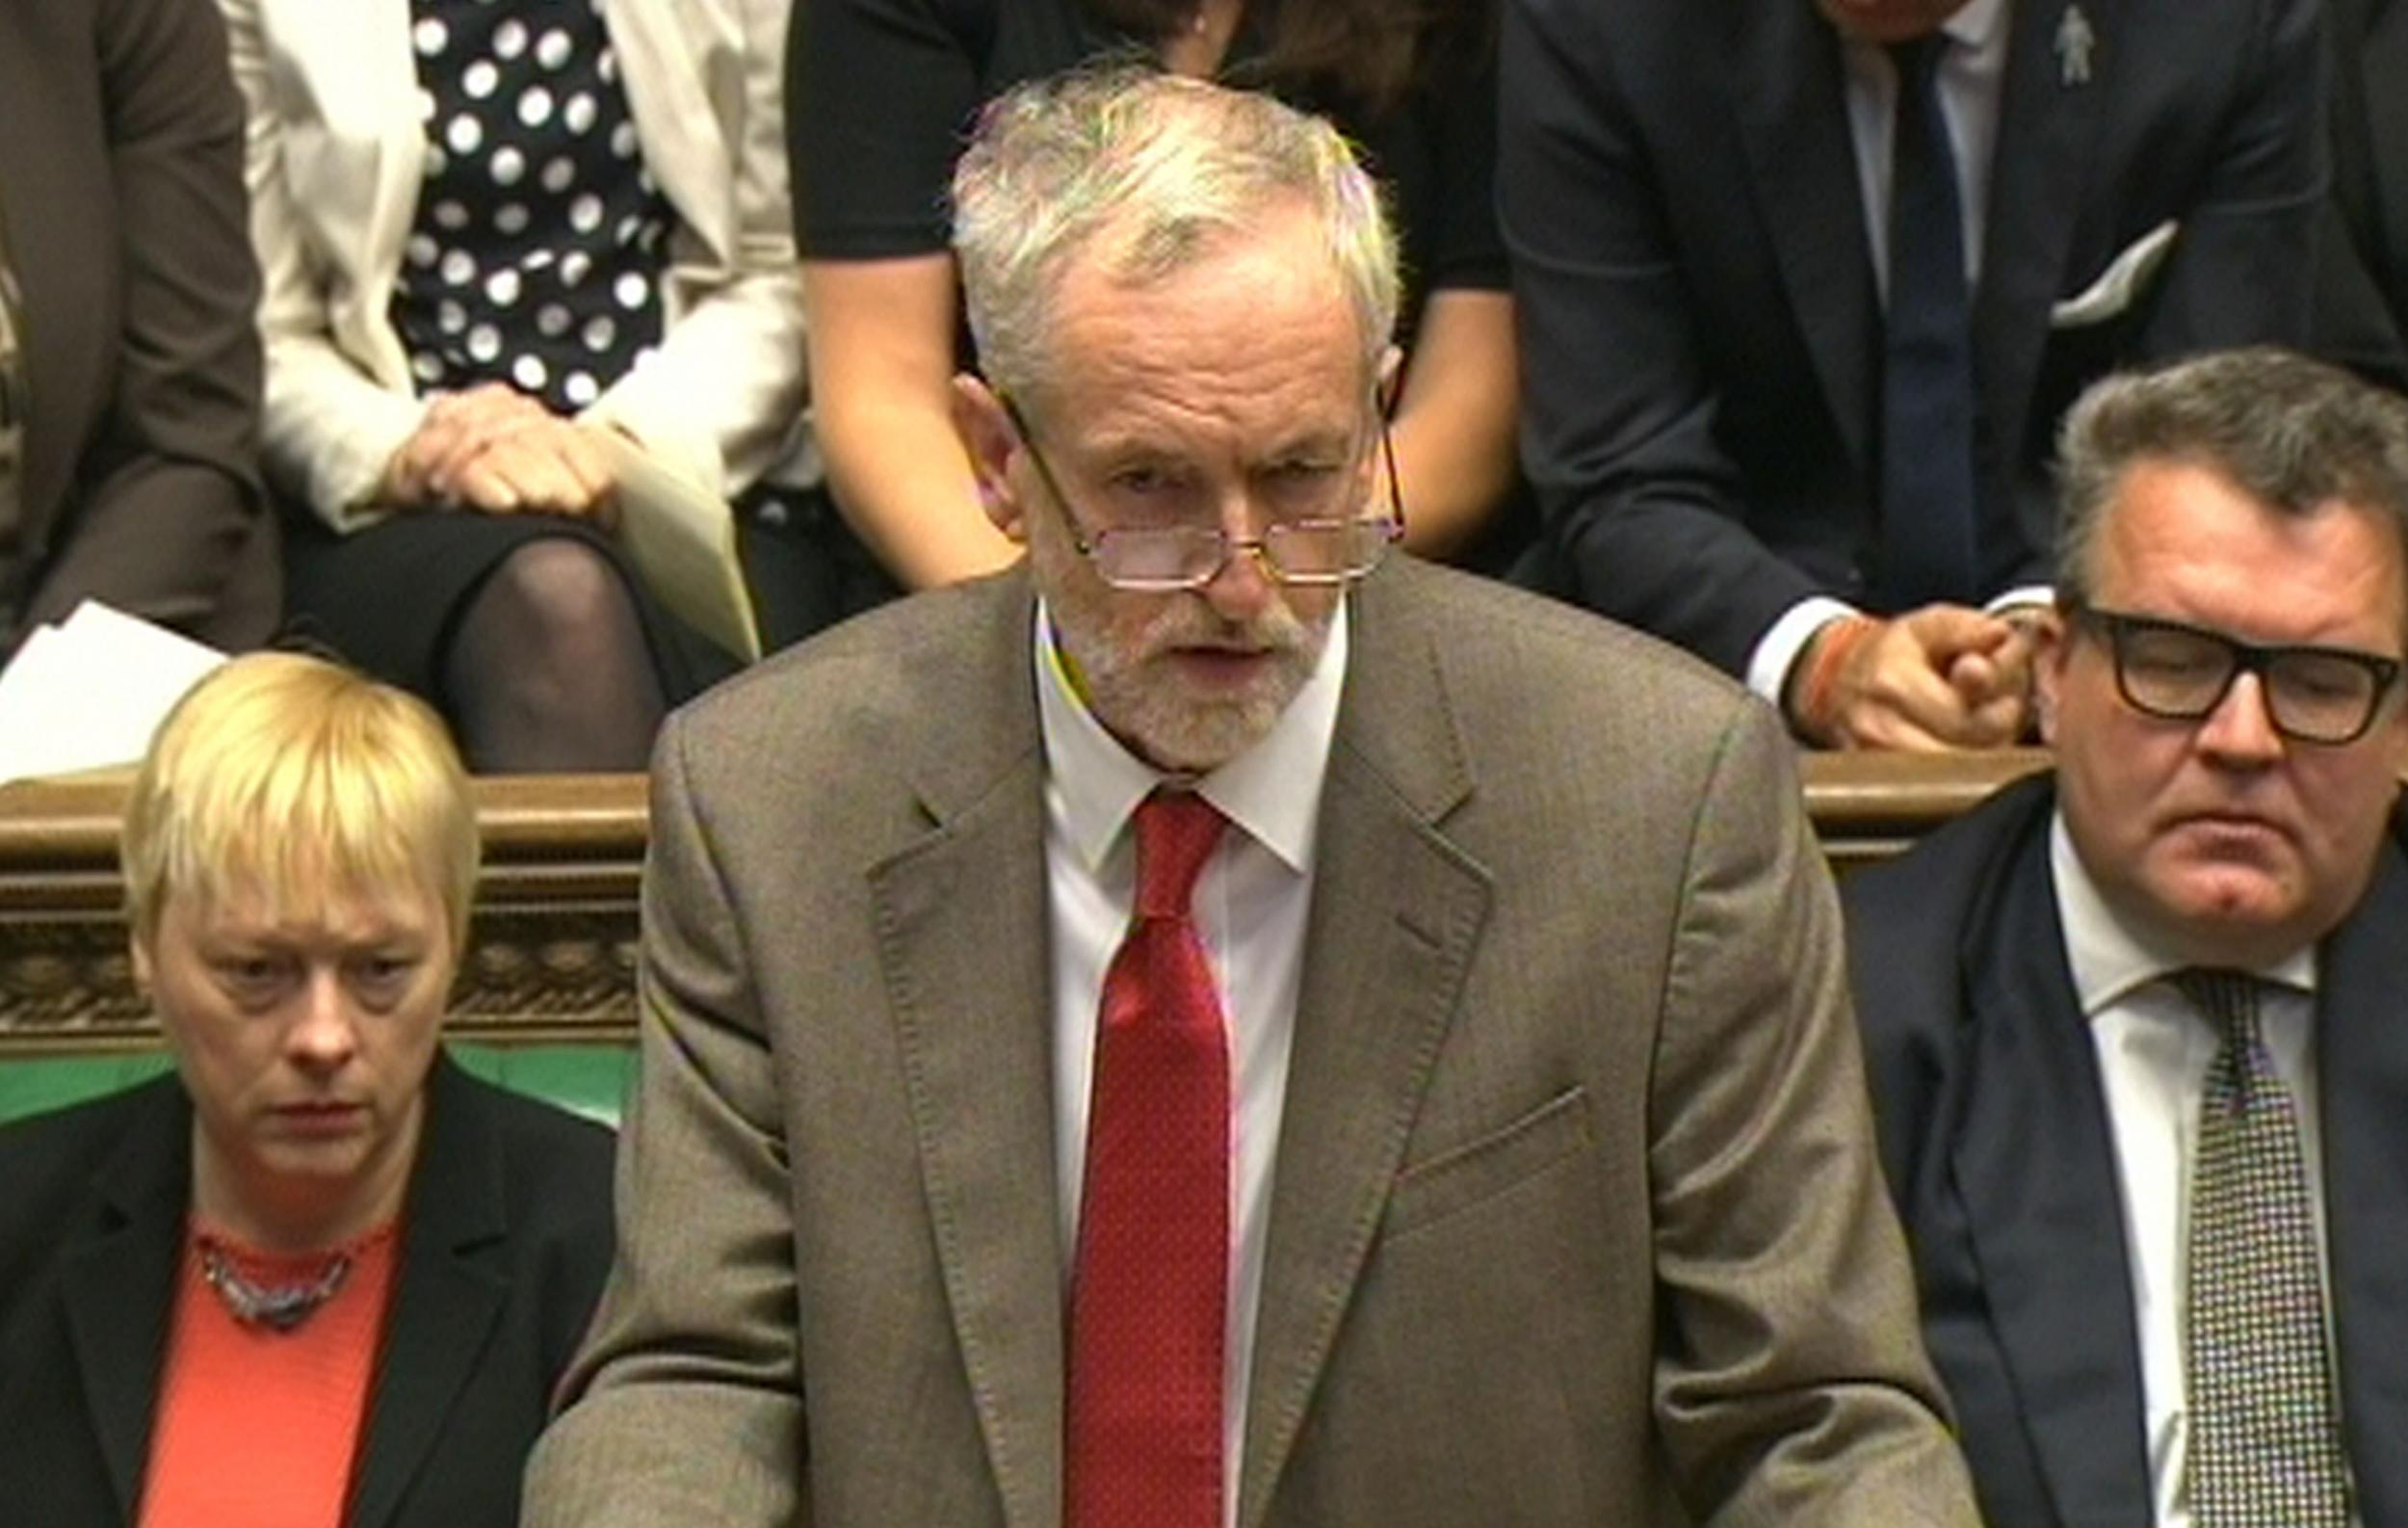 Labour leader Jeremy Corbyn will ask David Cameron his 100th question across the dispatch box today.